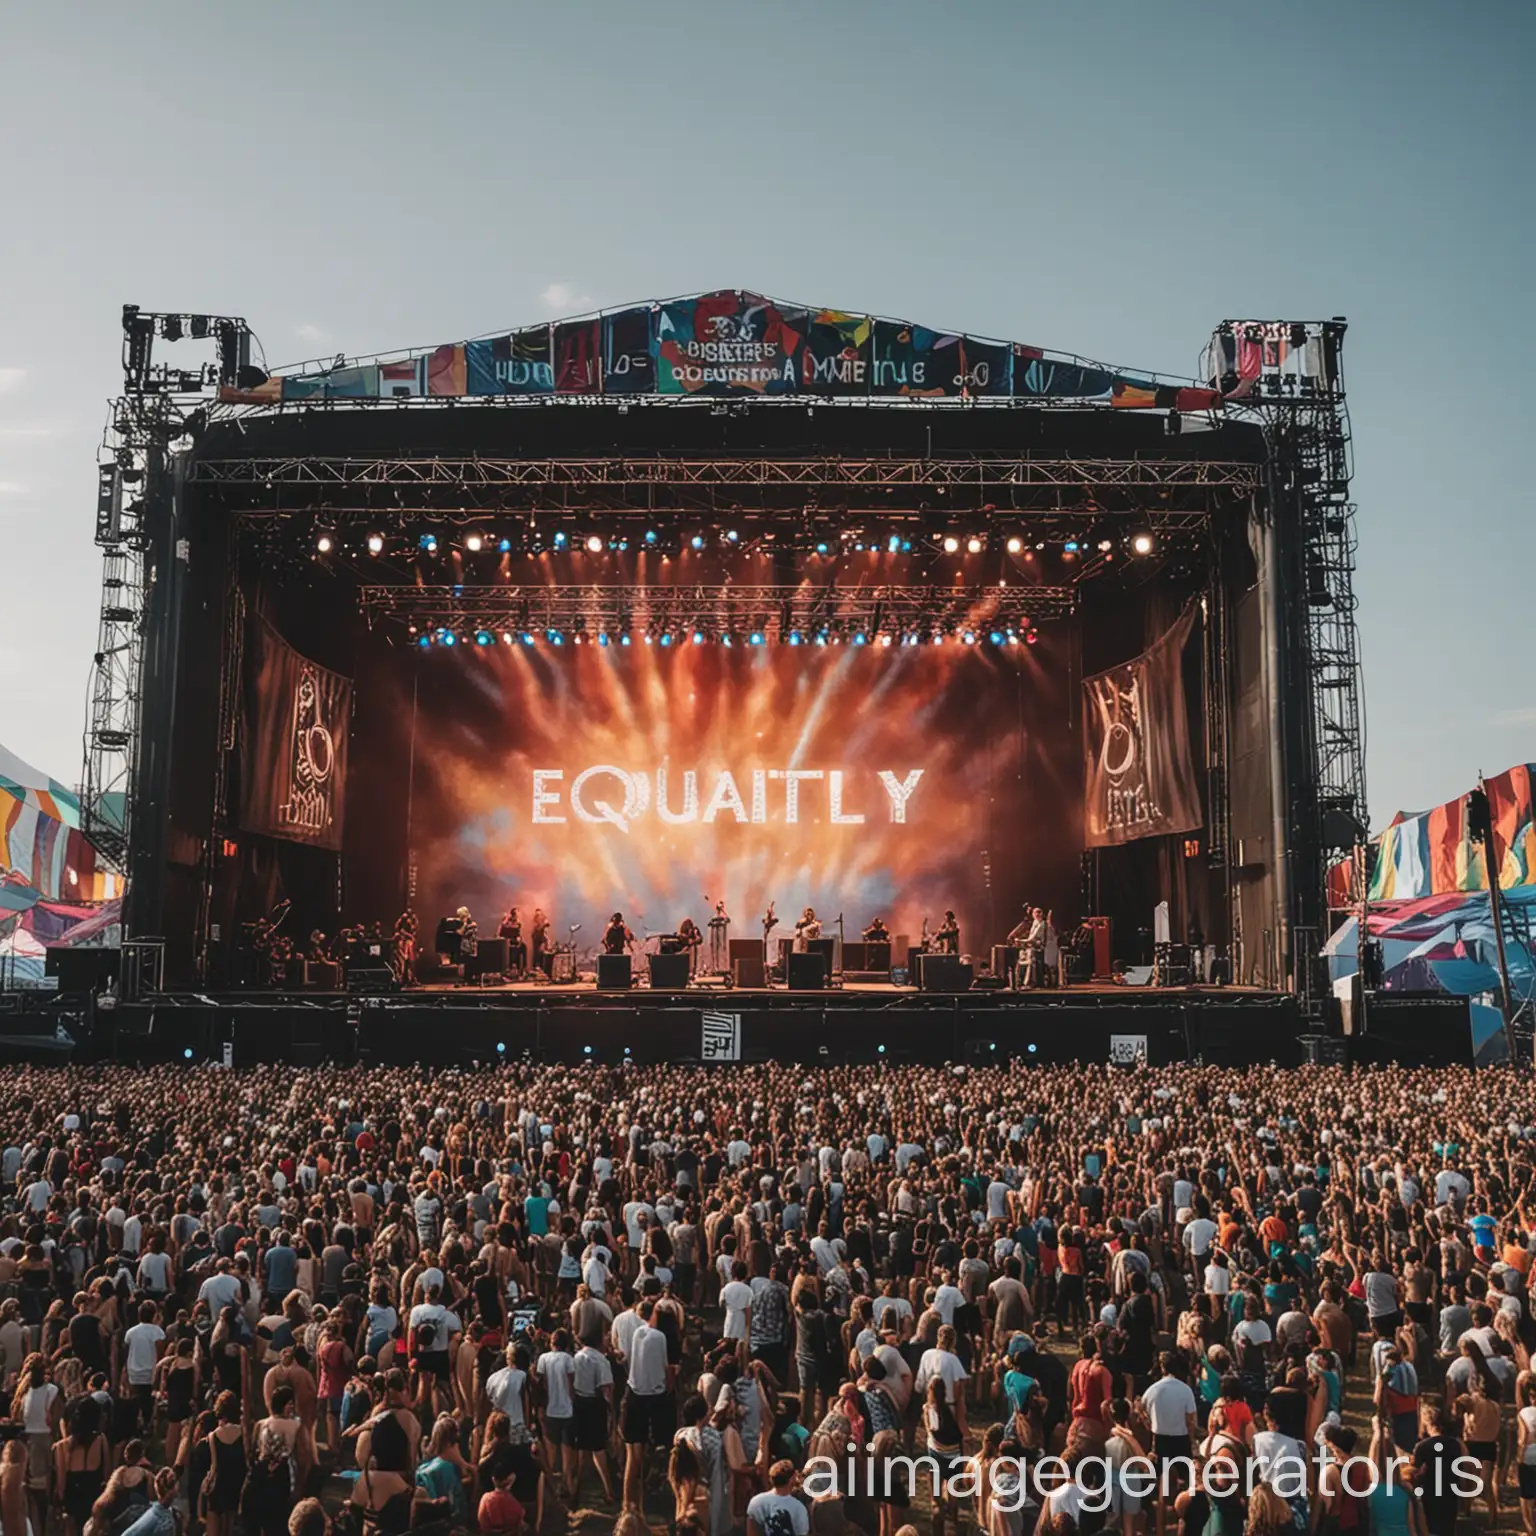 a stage of a music festival that has equality as its theme